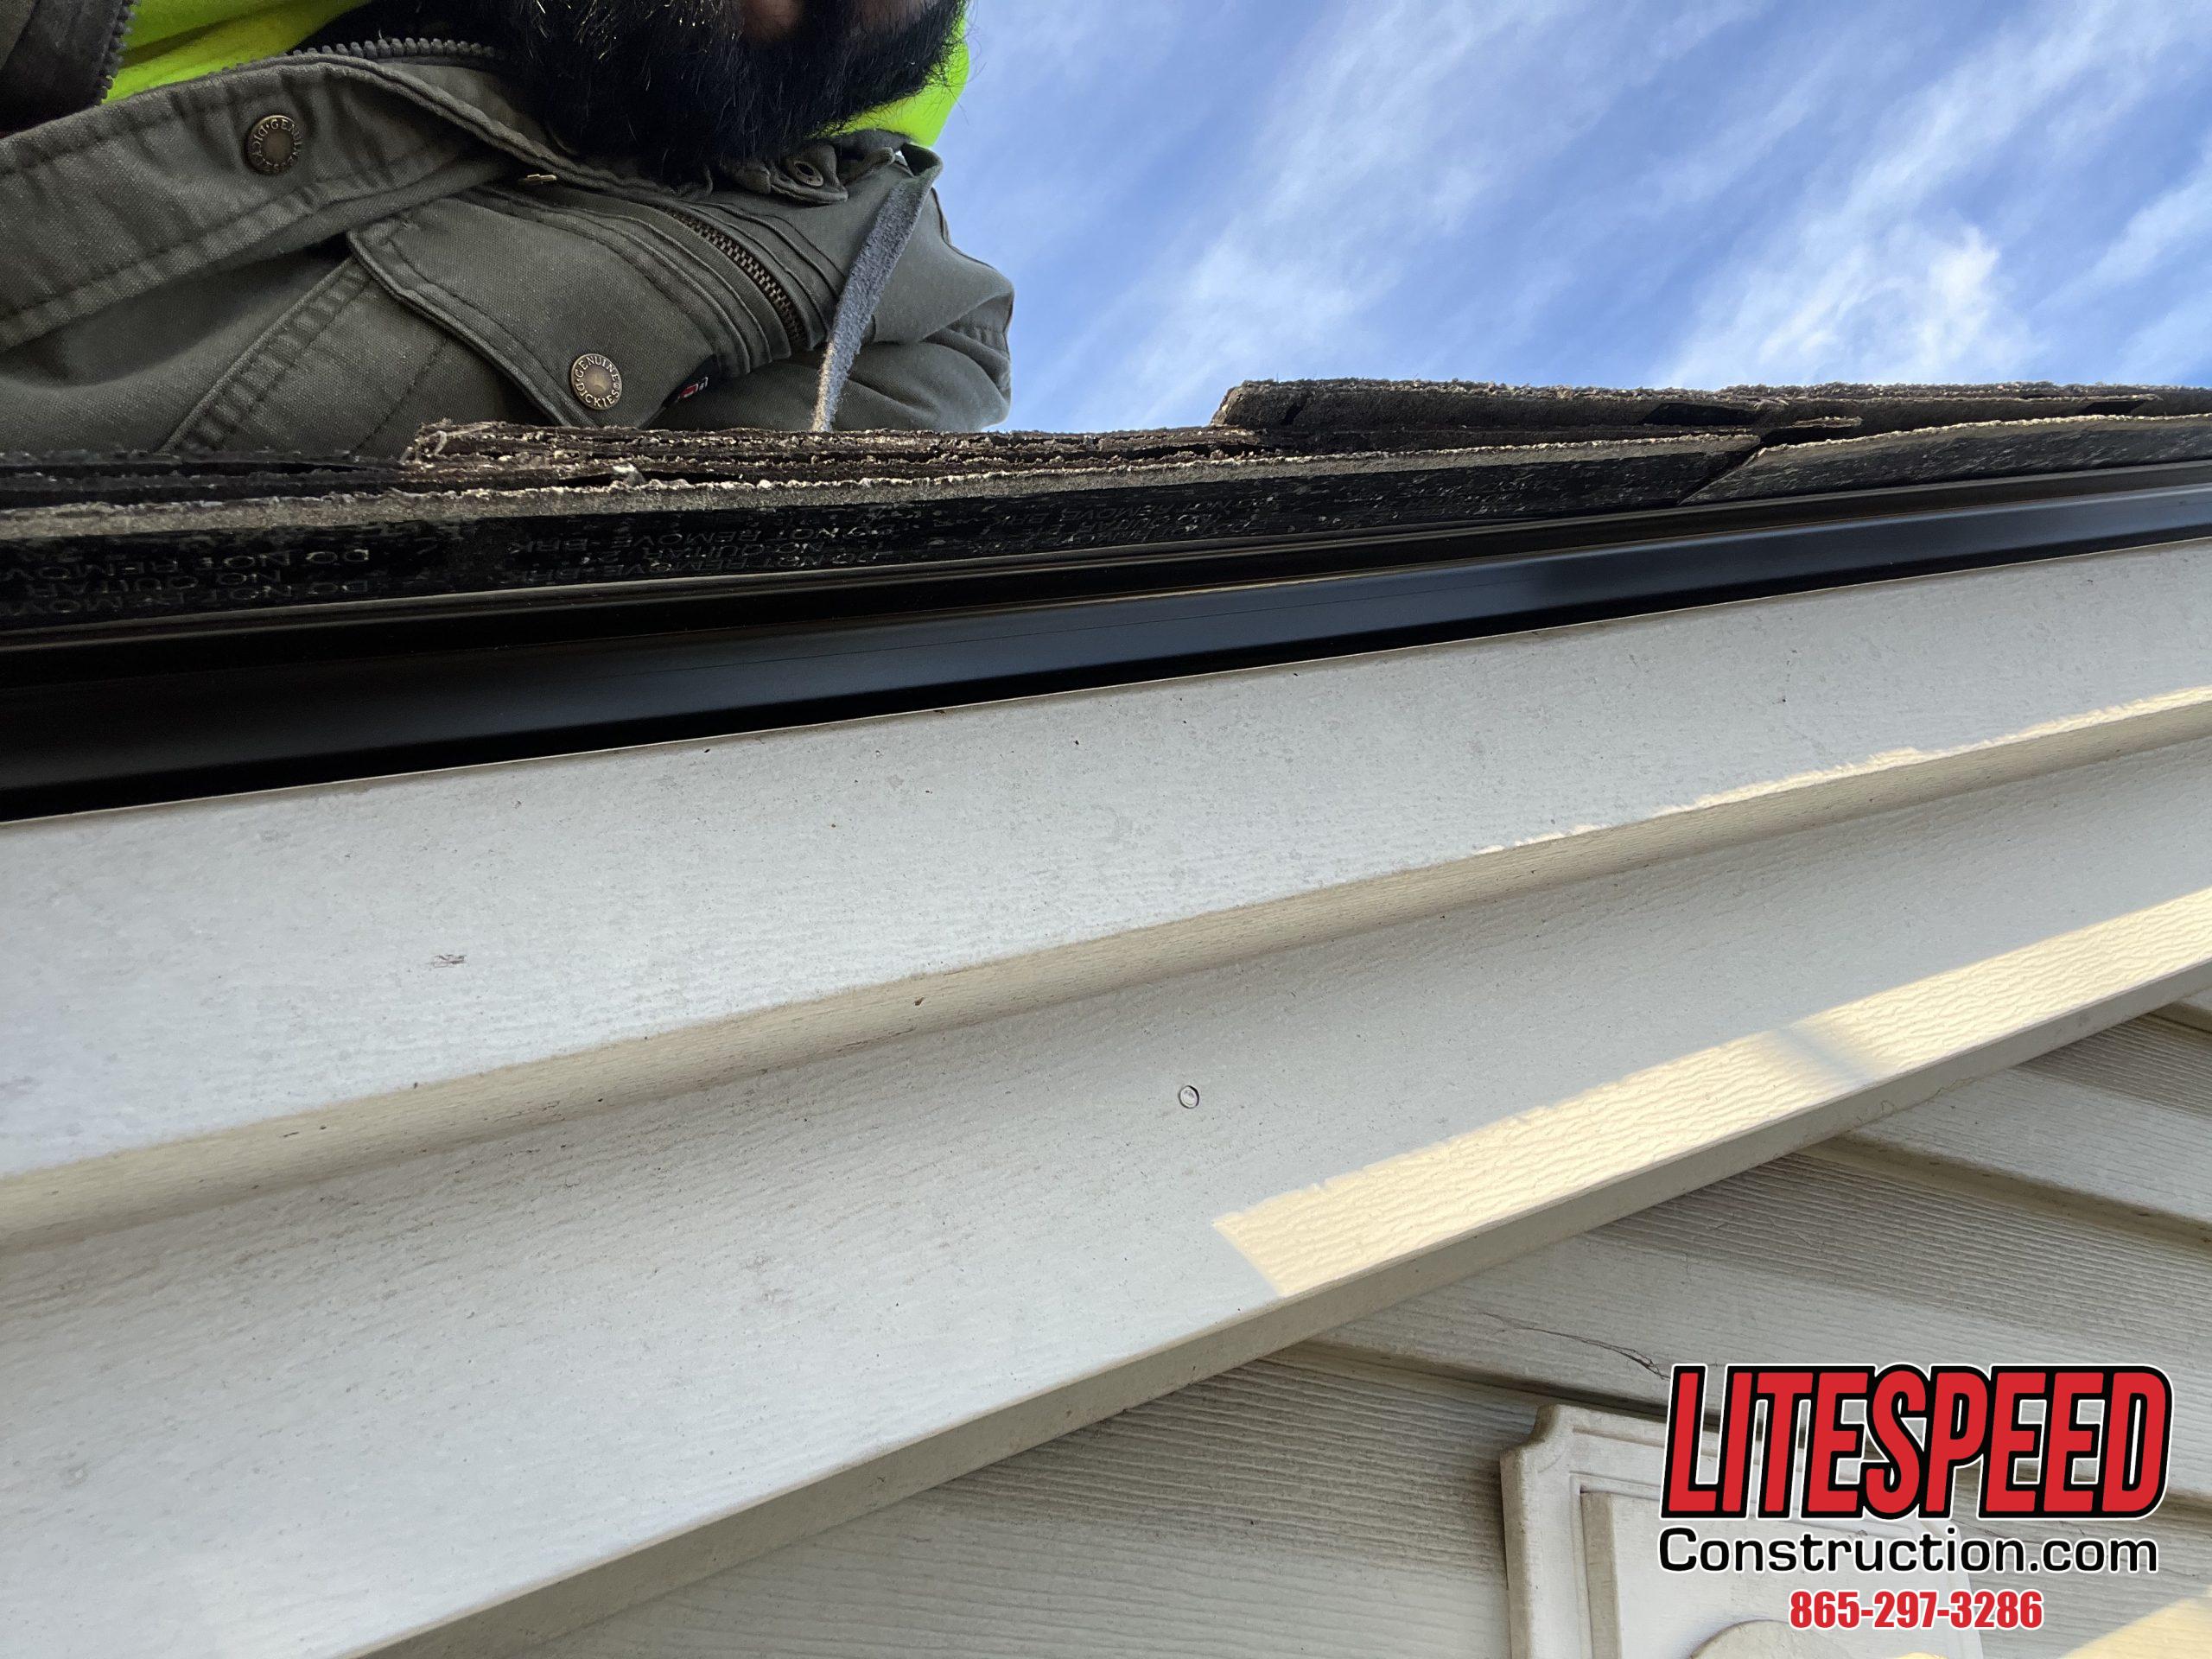 This is a picture of drip edge at the edge of the roof